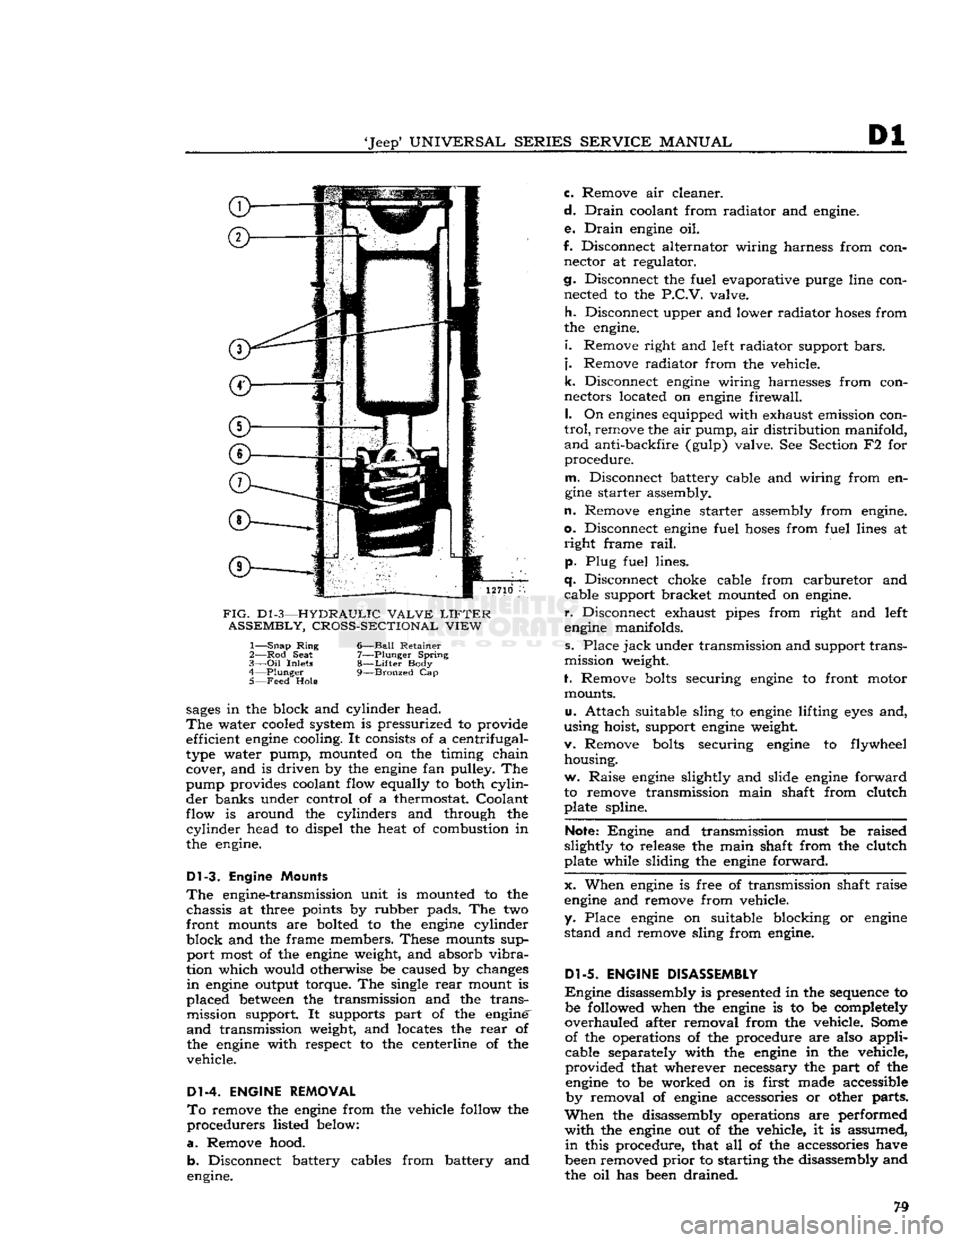 JEEP DJ 1953  Service Manual 
Jeep*
 UNIVERSAL SERIES SERVICE
 MANUAL 

Dl 

12710 

FIG.
 D1
 -3—HYDRAULIC VALVE
 LIFTER 
 ASSEMBLY, CROSS-SECTIONAL VIEW 
1—
 Snap
 Ring
 6—Ball Retainer 

2— Rod
 Seat
 7—Plunger Spri